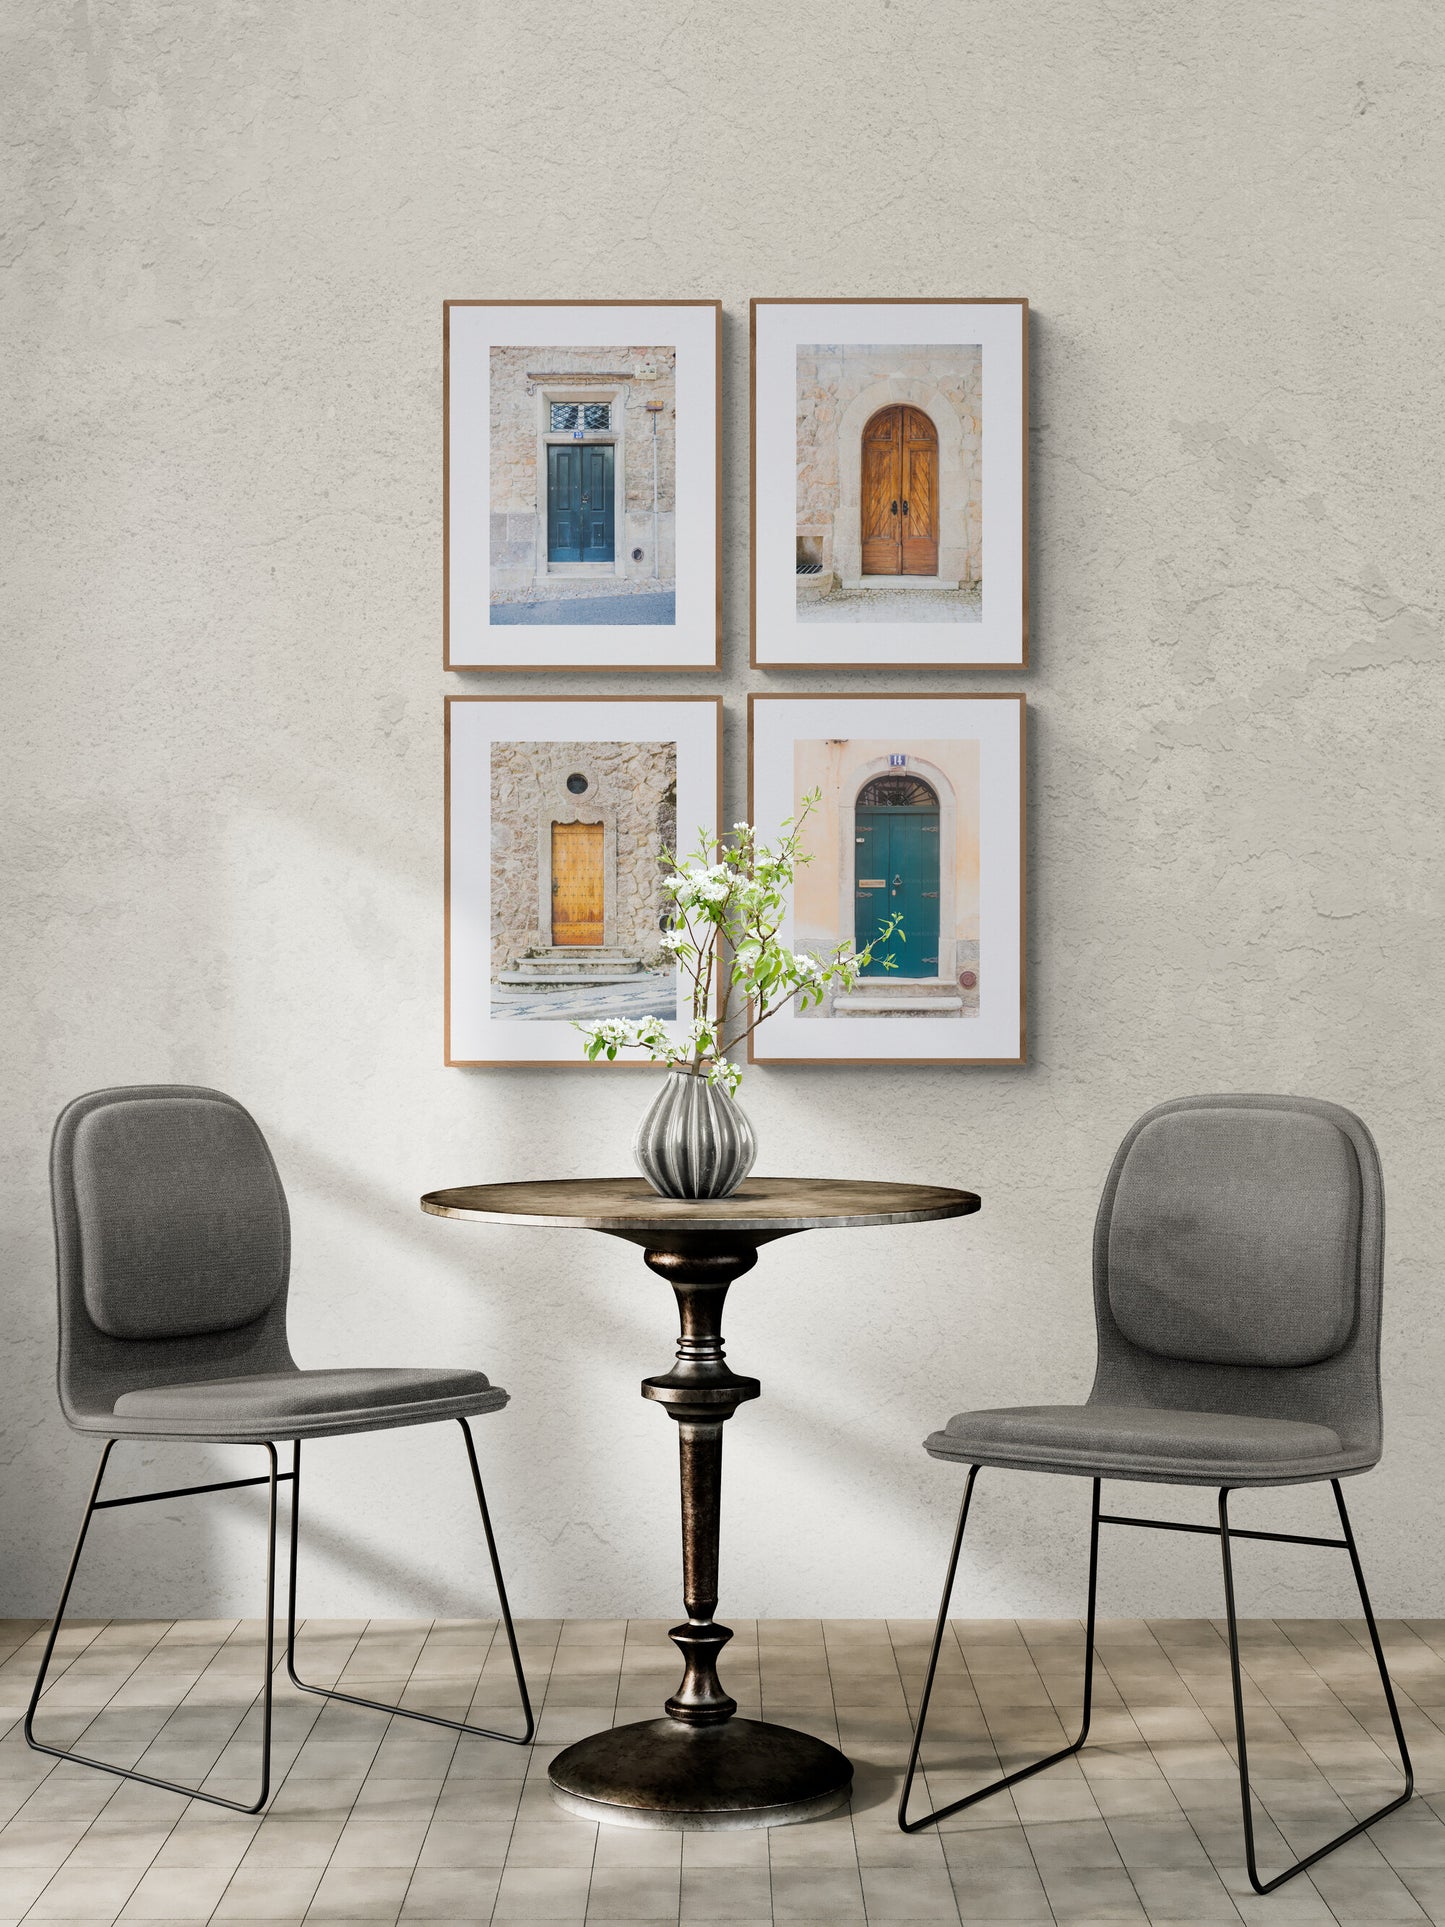 Set of 4 Door Photographs of Sintra Portugal shown in a dining room as wall art